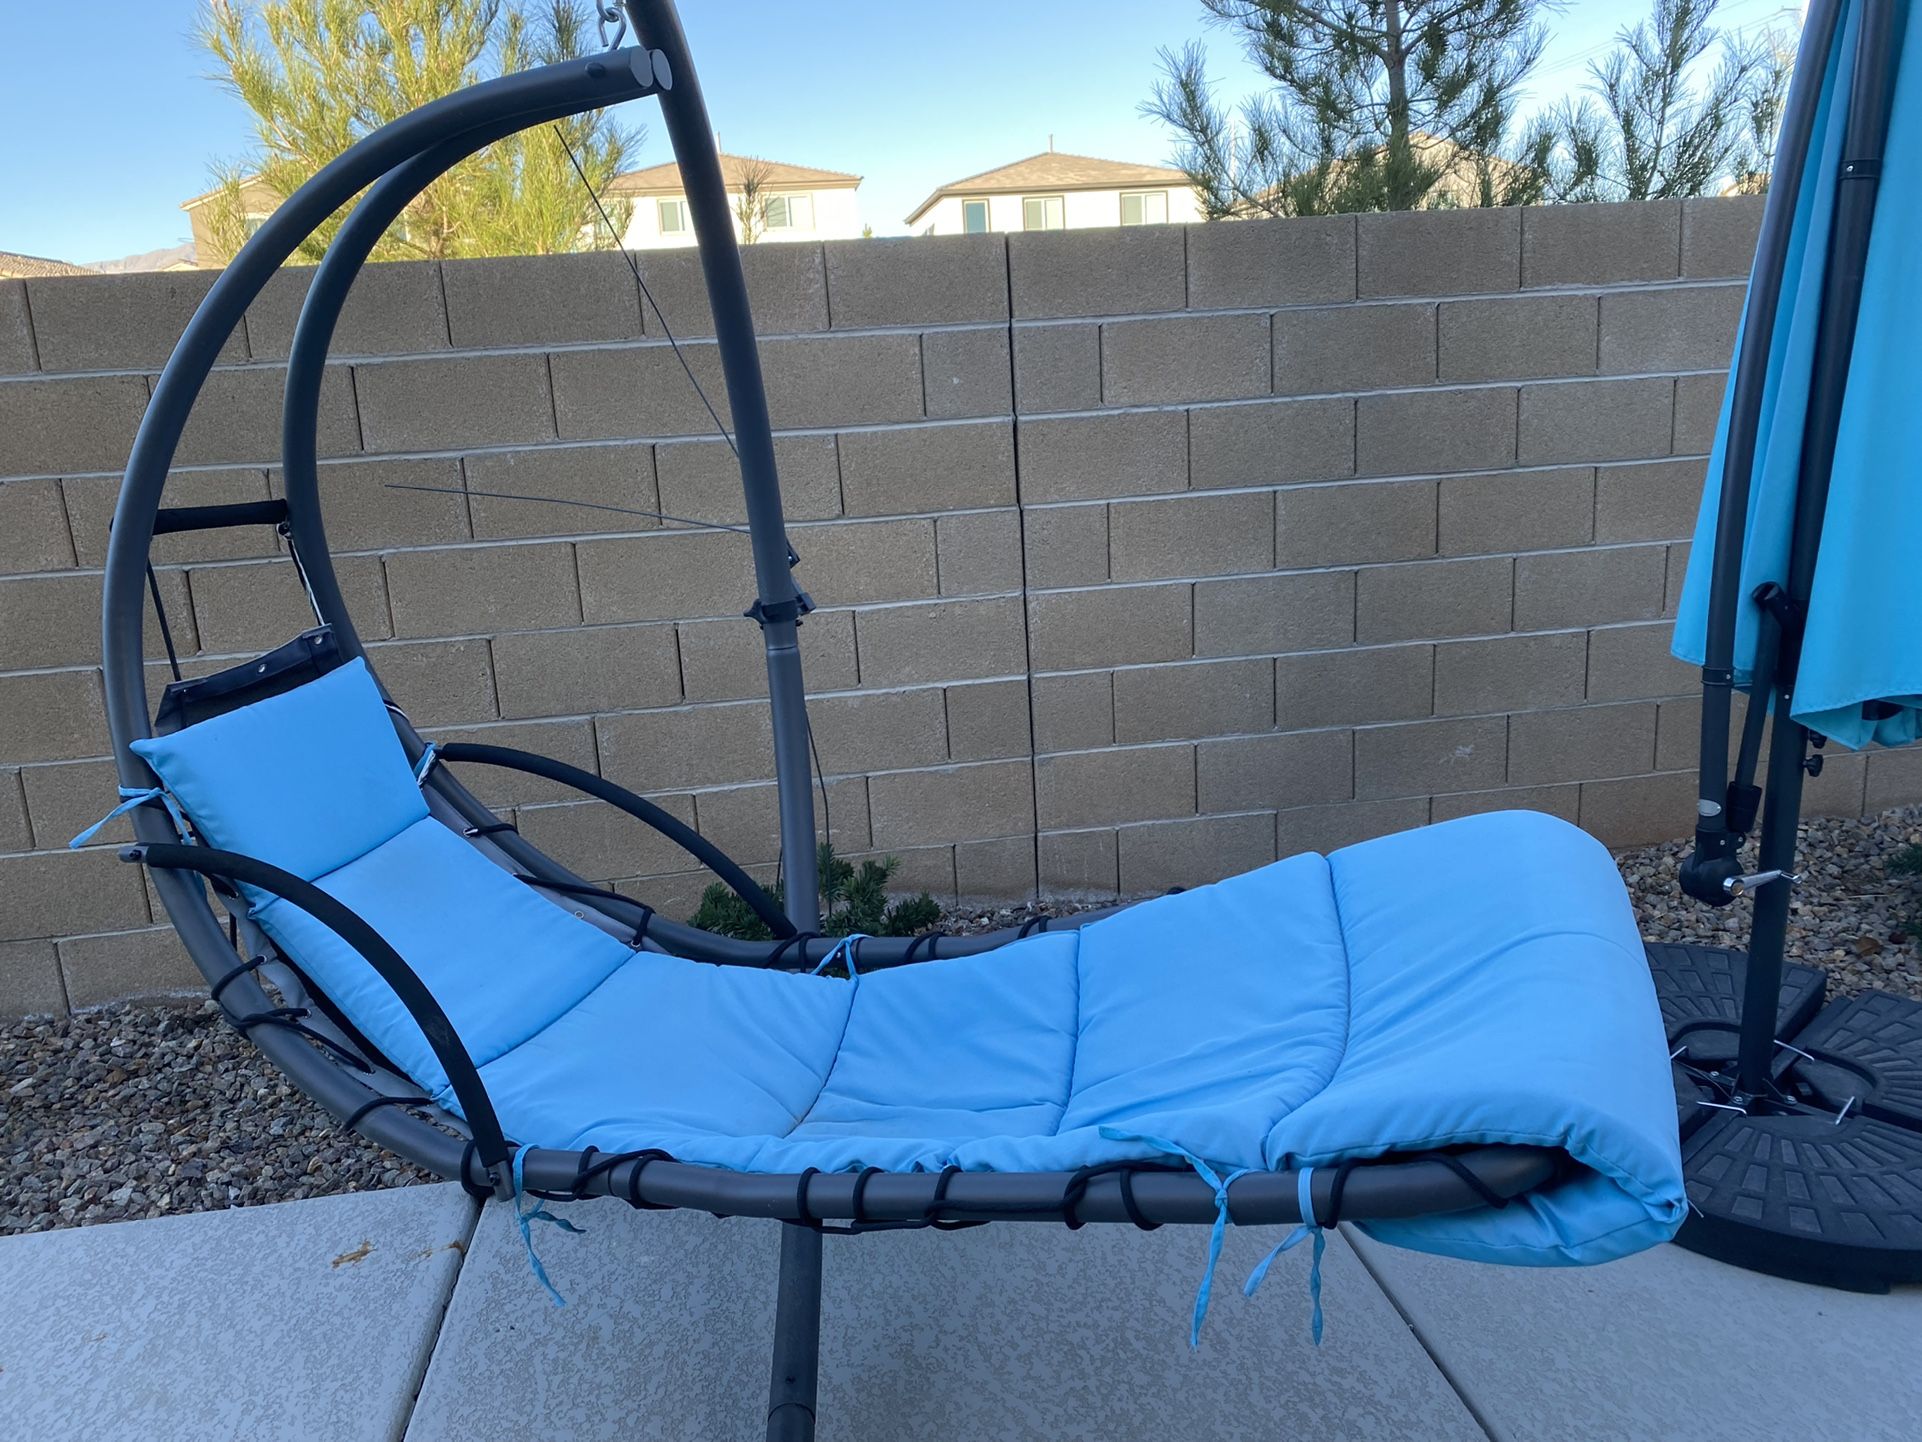 Two Blue Hanging Chairs $150 Each Umbrella Is $85